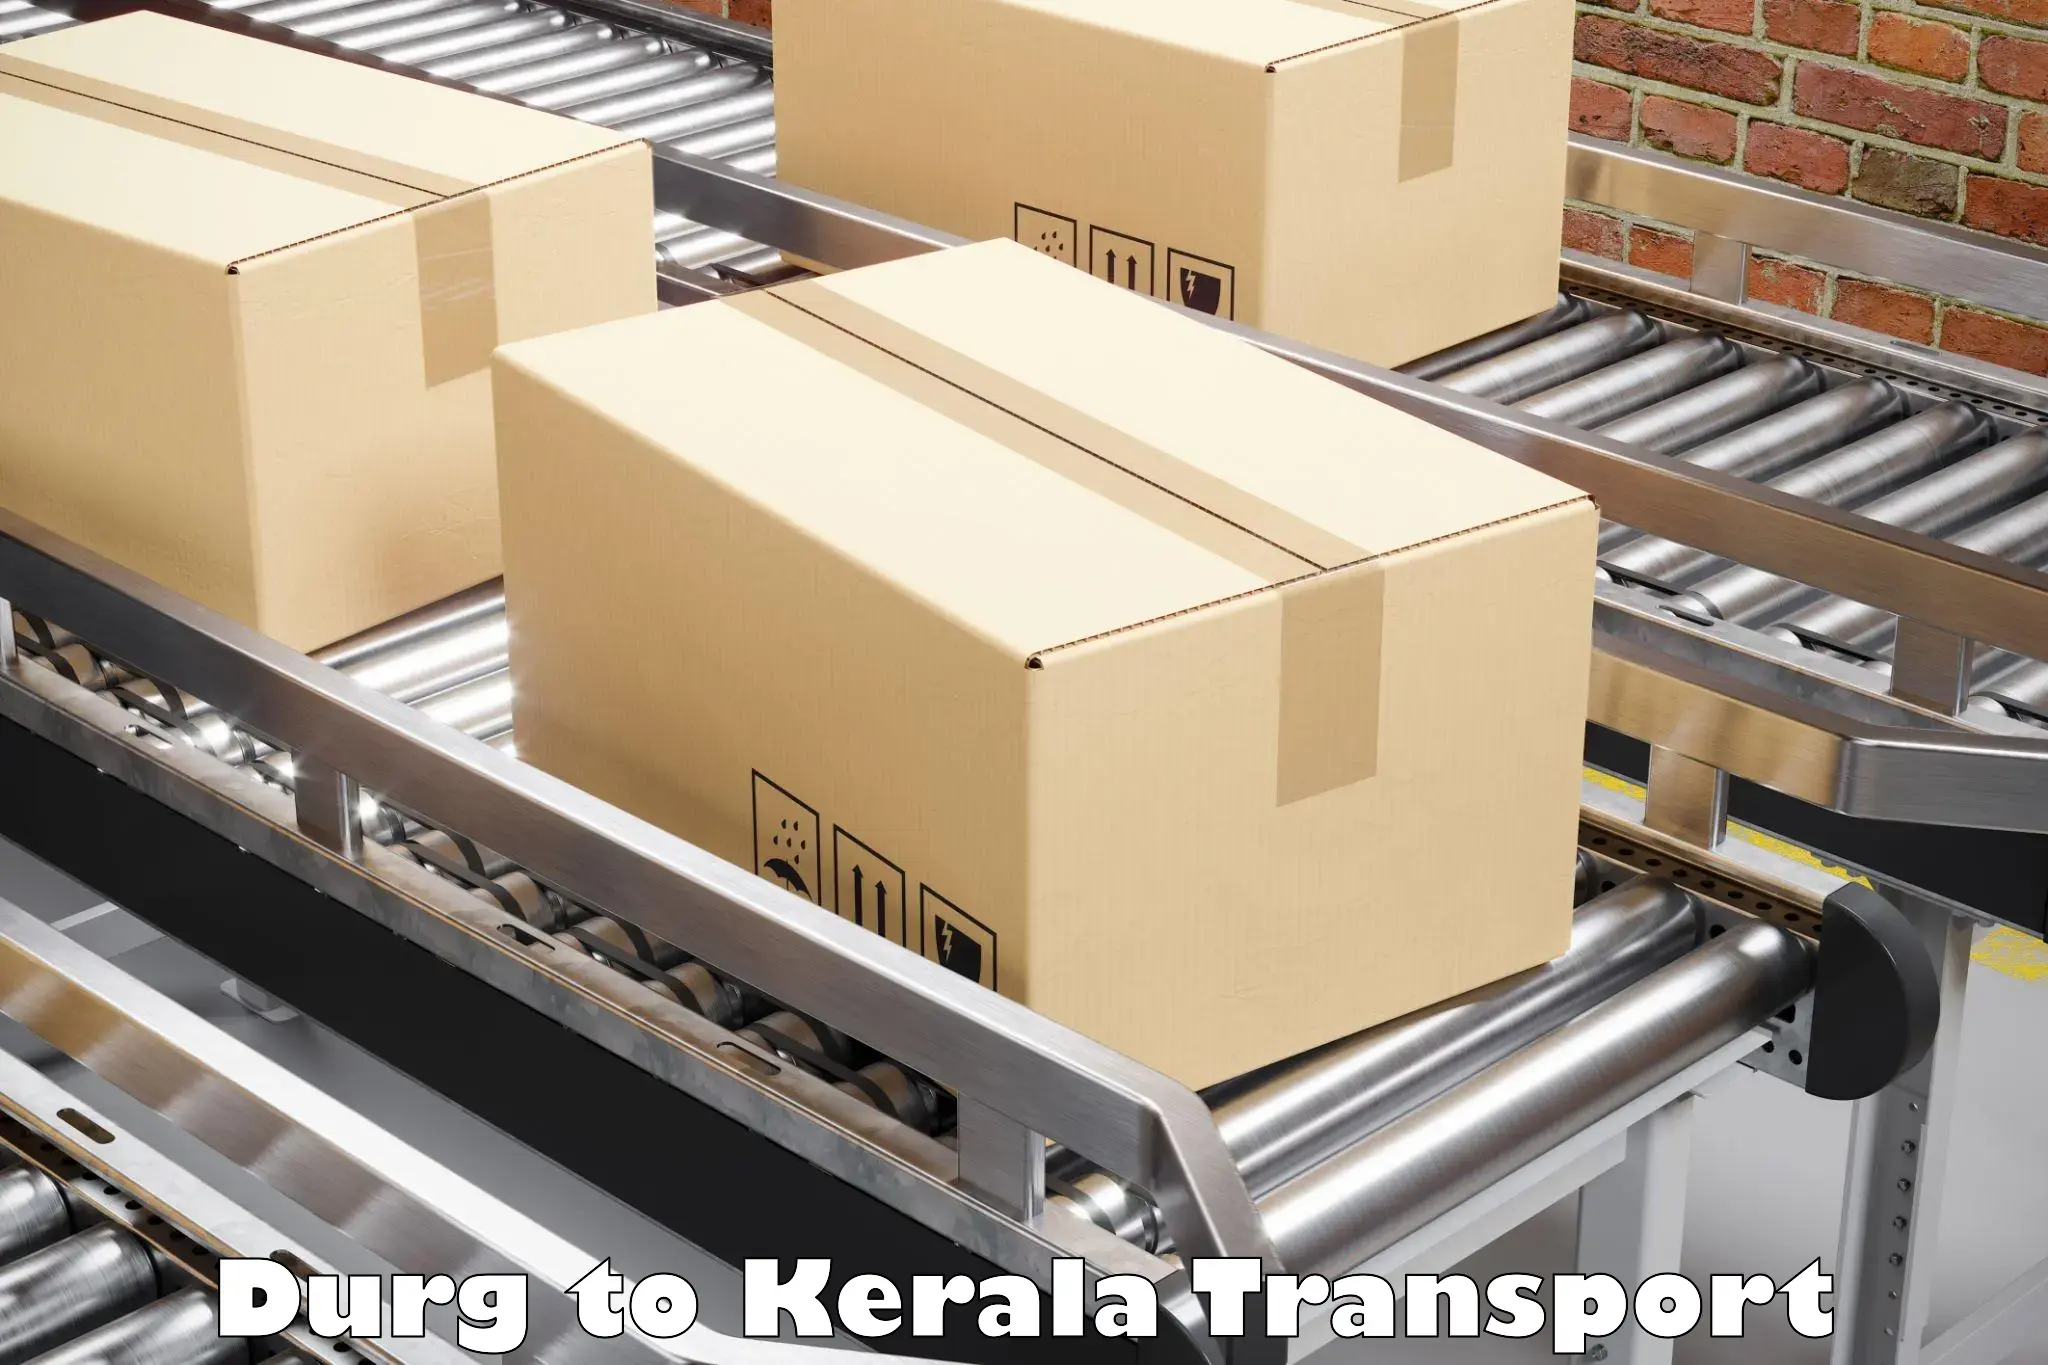 Daily parcel service transport Durg to Kottayam